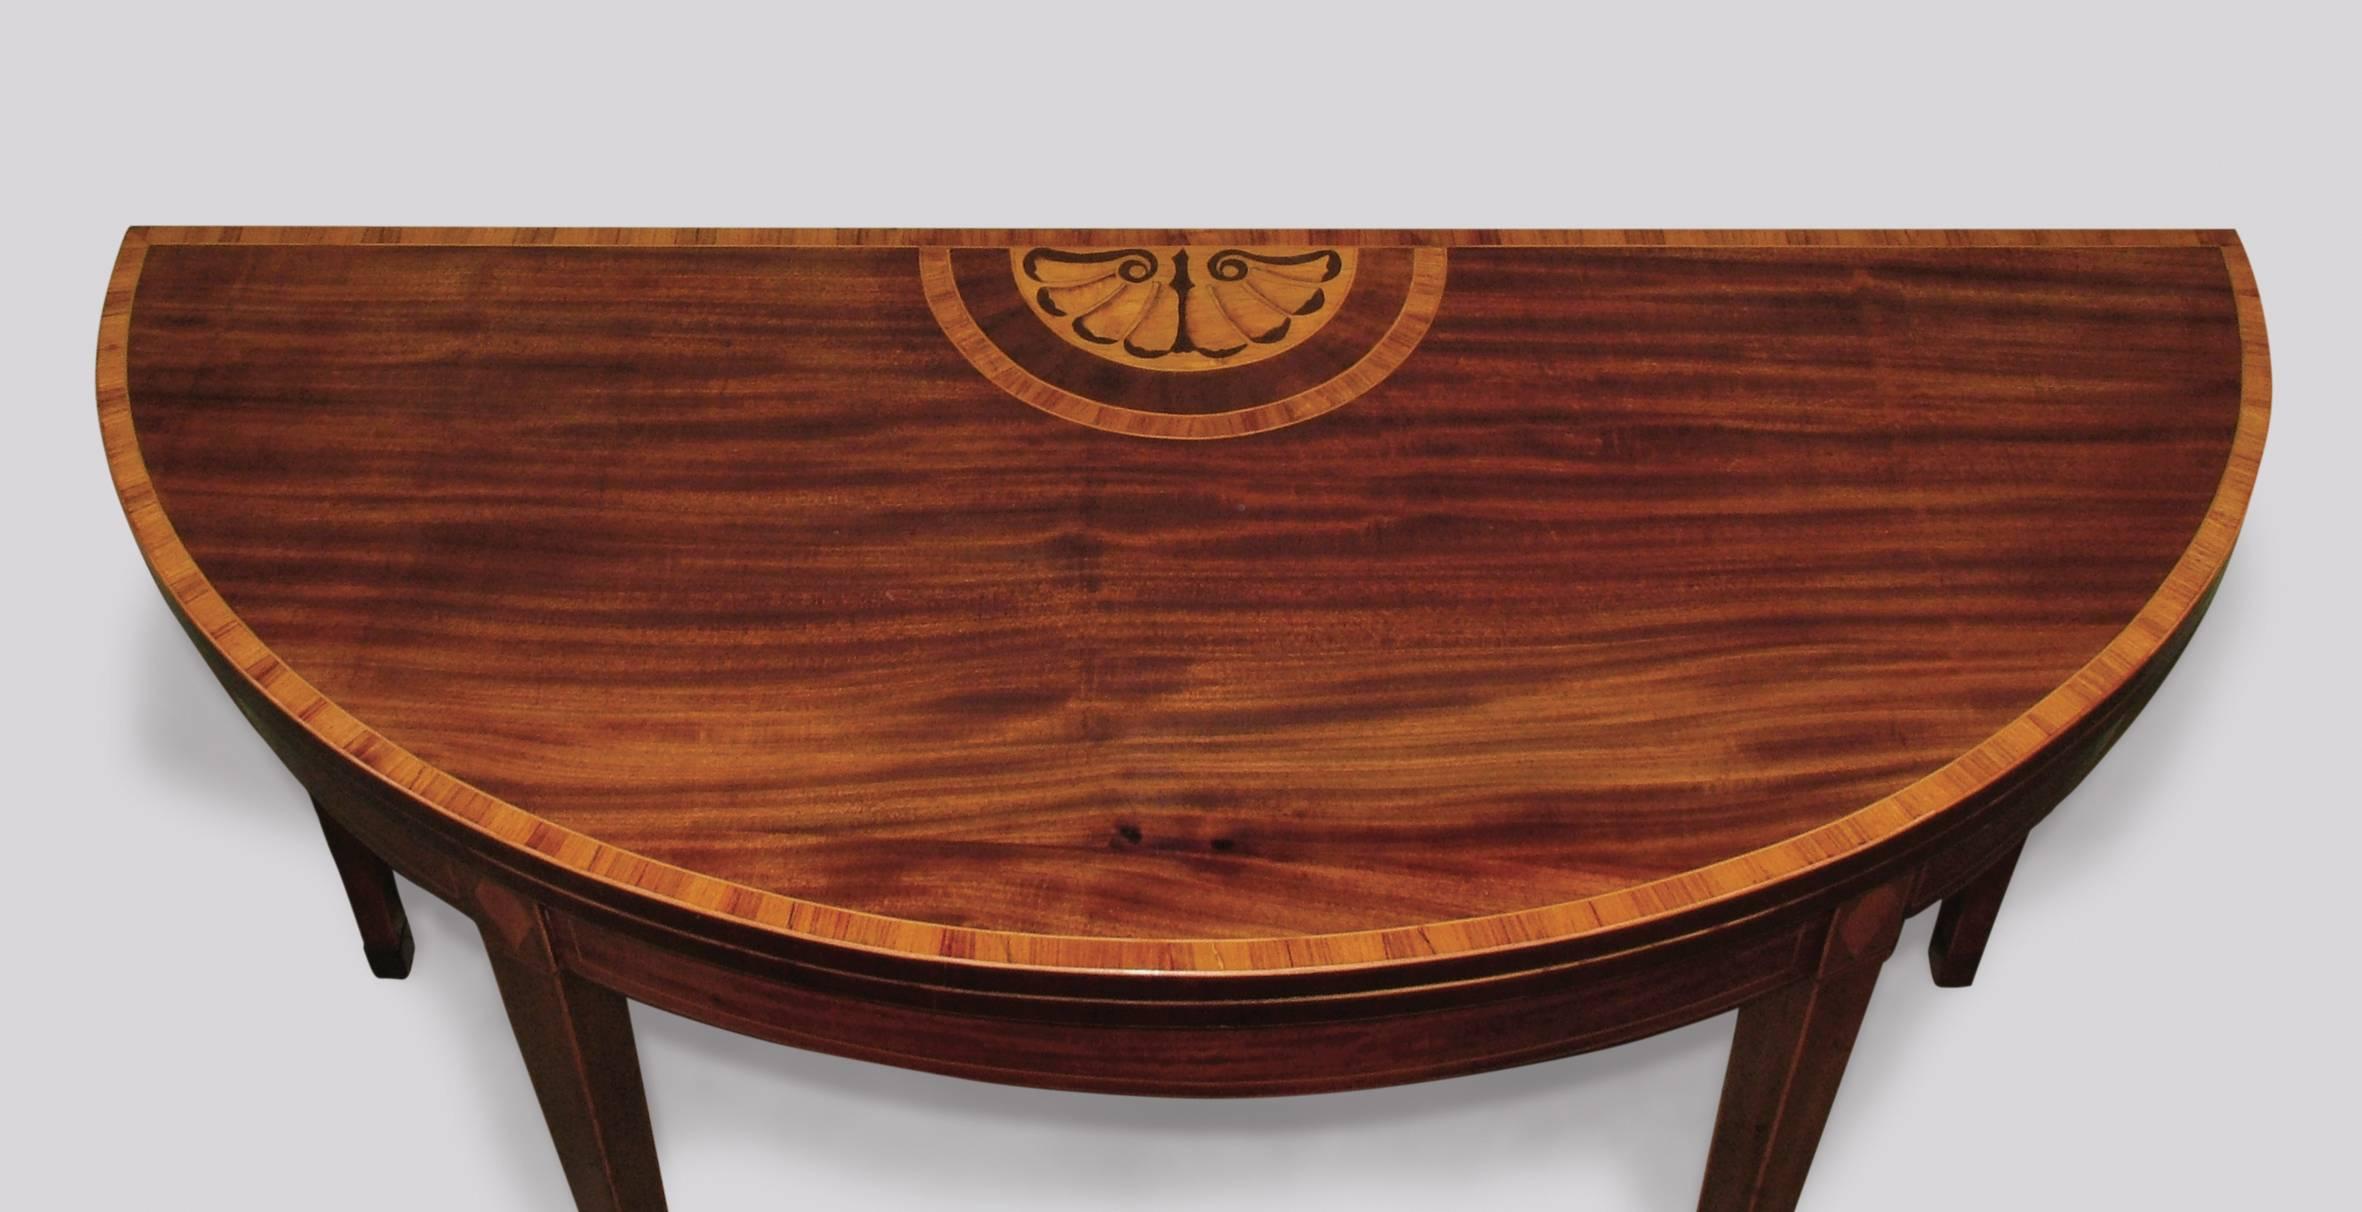 A late 18th century Sheraton period figured mahogany demilune card table of unusual large proportions, having tulipwood crossbanded top with central shell panel above boxwood and ebony strung frieze with diamond inlaid panels, supported on square